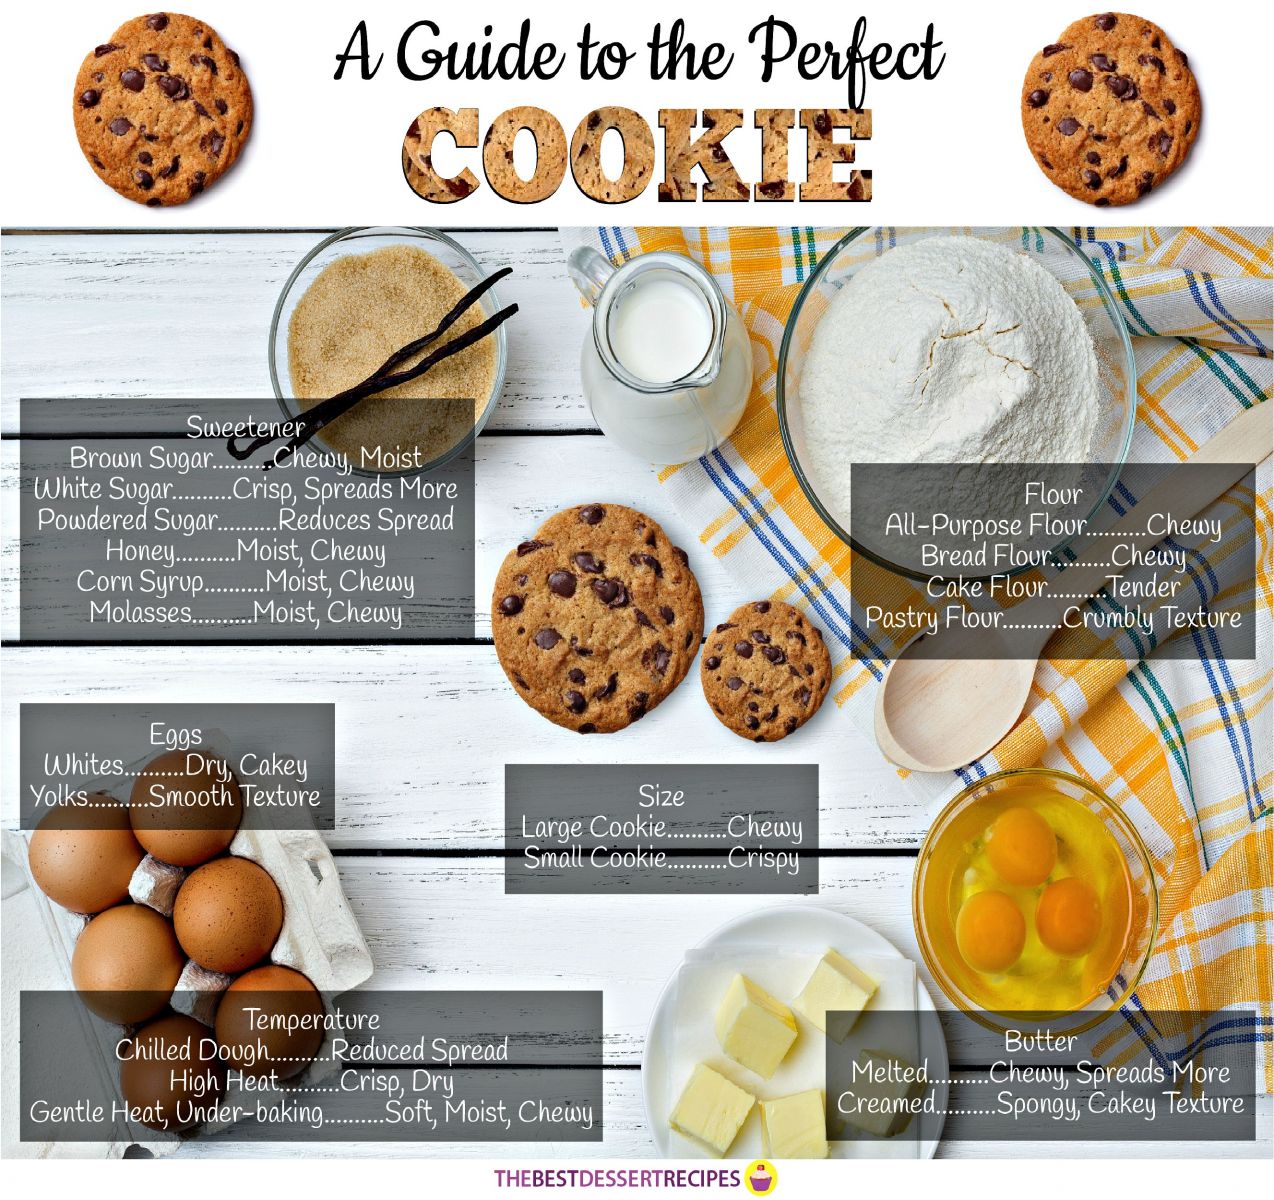 A Guide to the Perfect Cookie